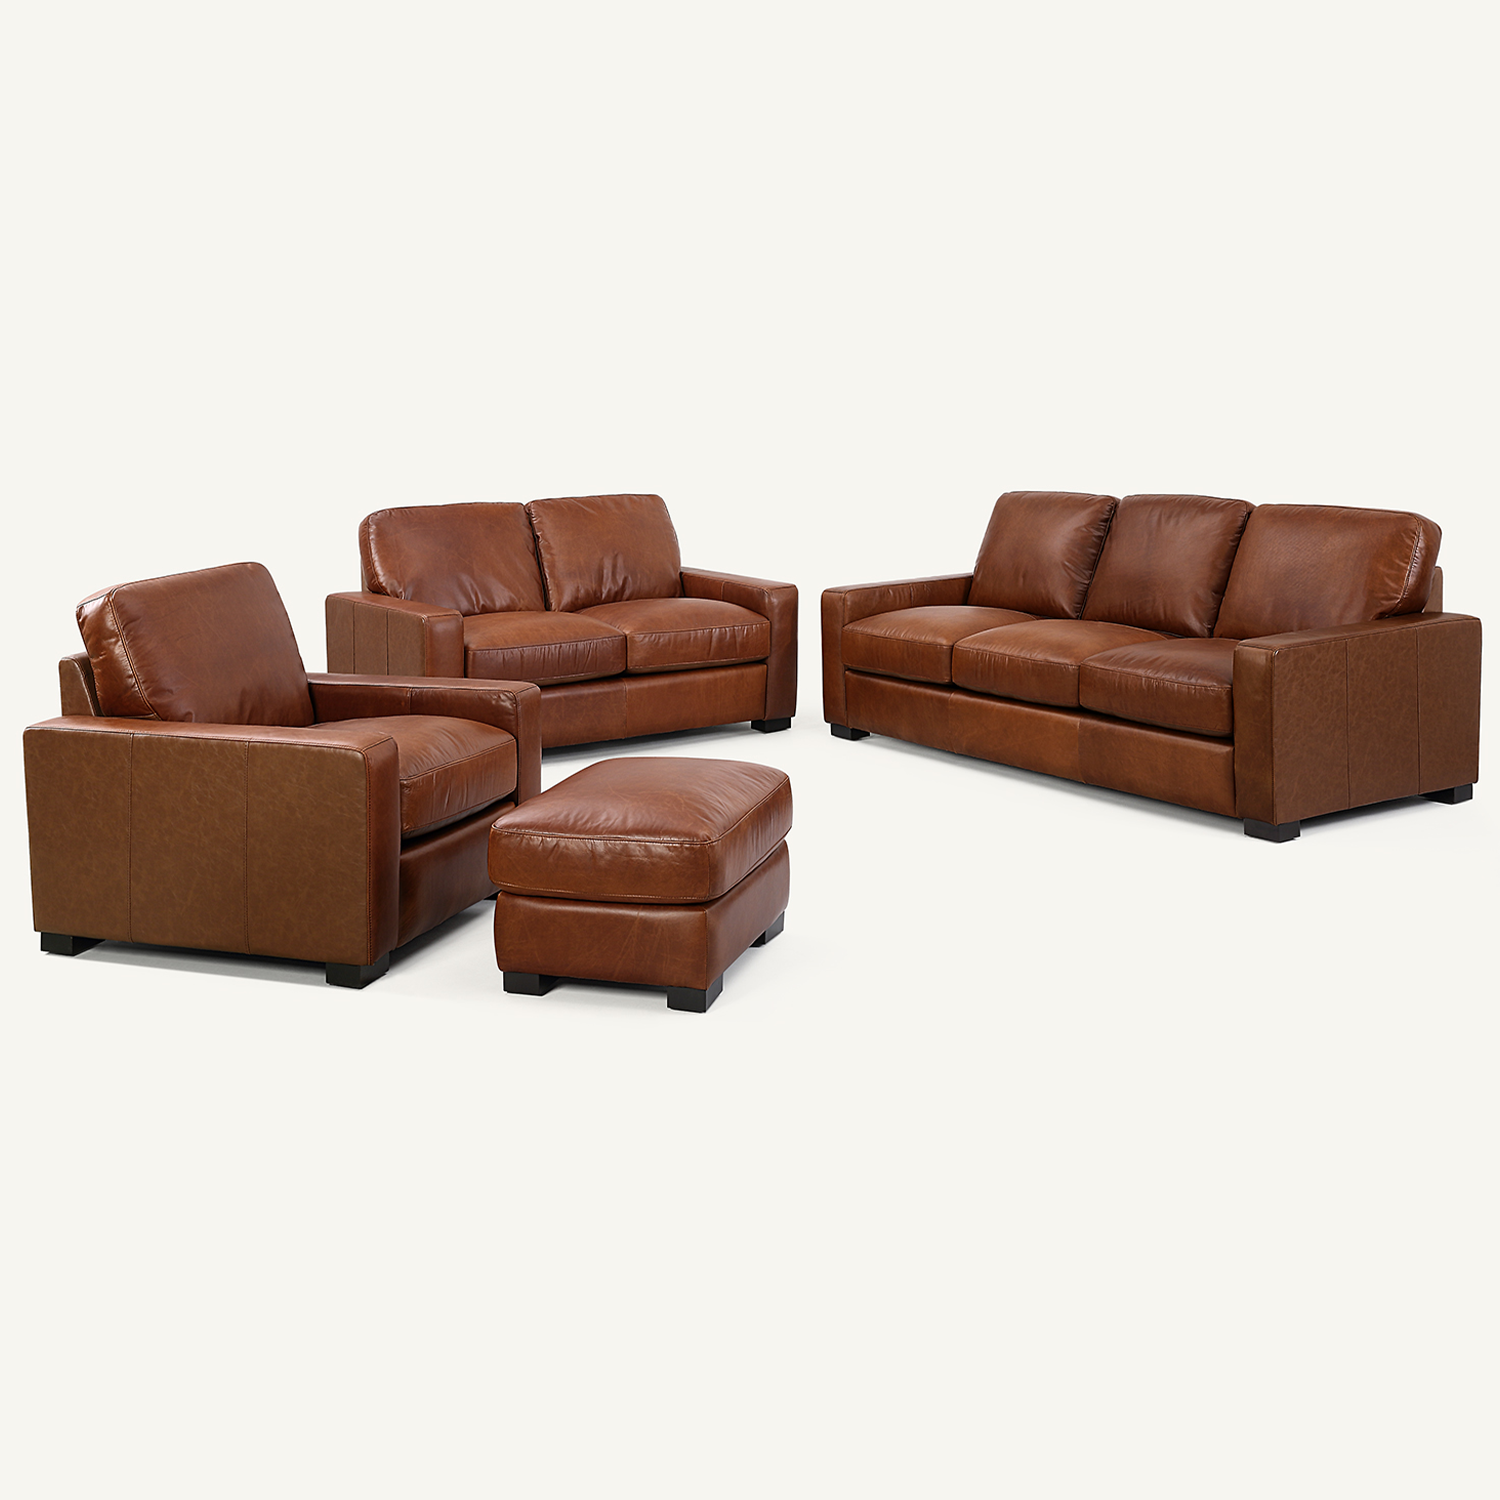 Randall Chestnut Brown Oil Wax Leather 4 Pieces Living Room Sofa Set